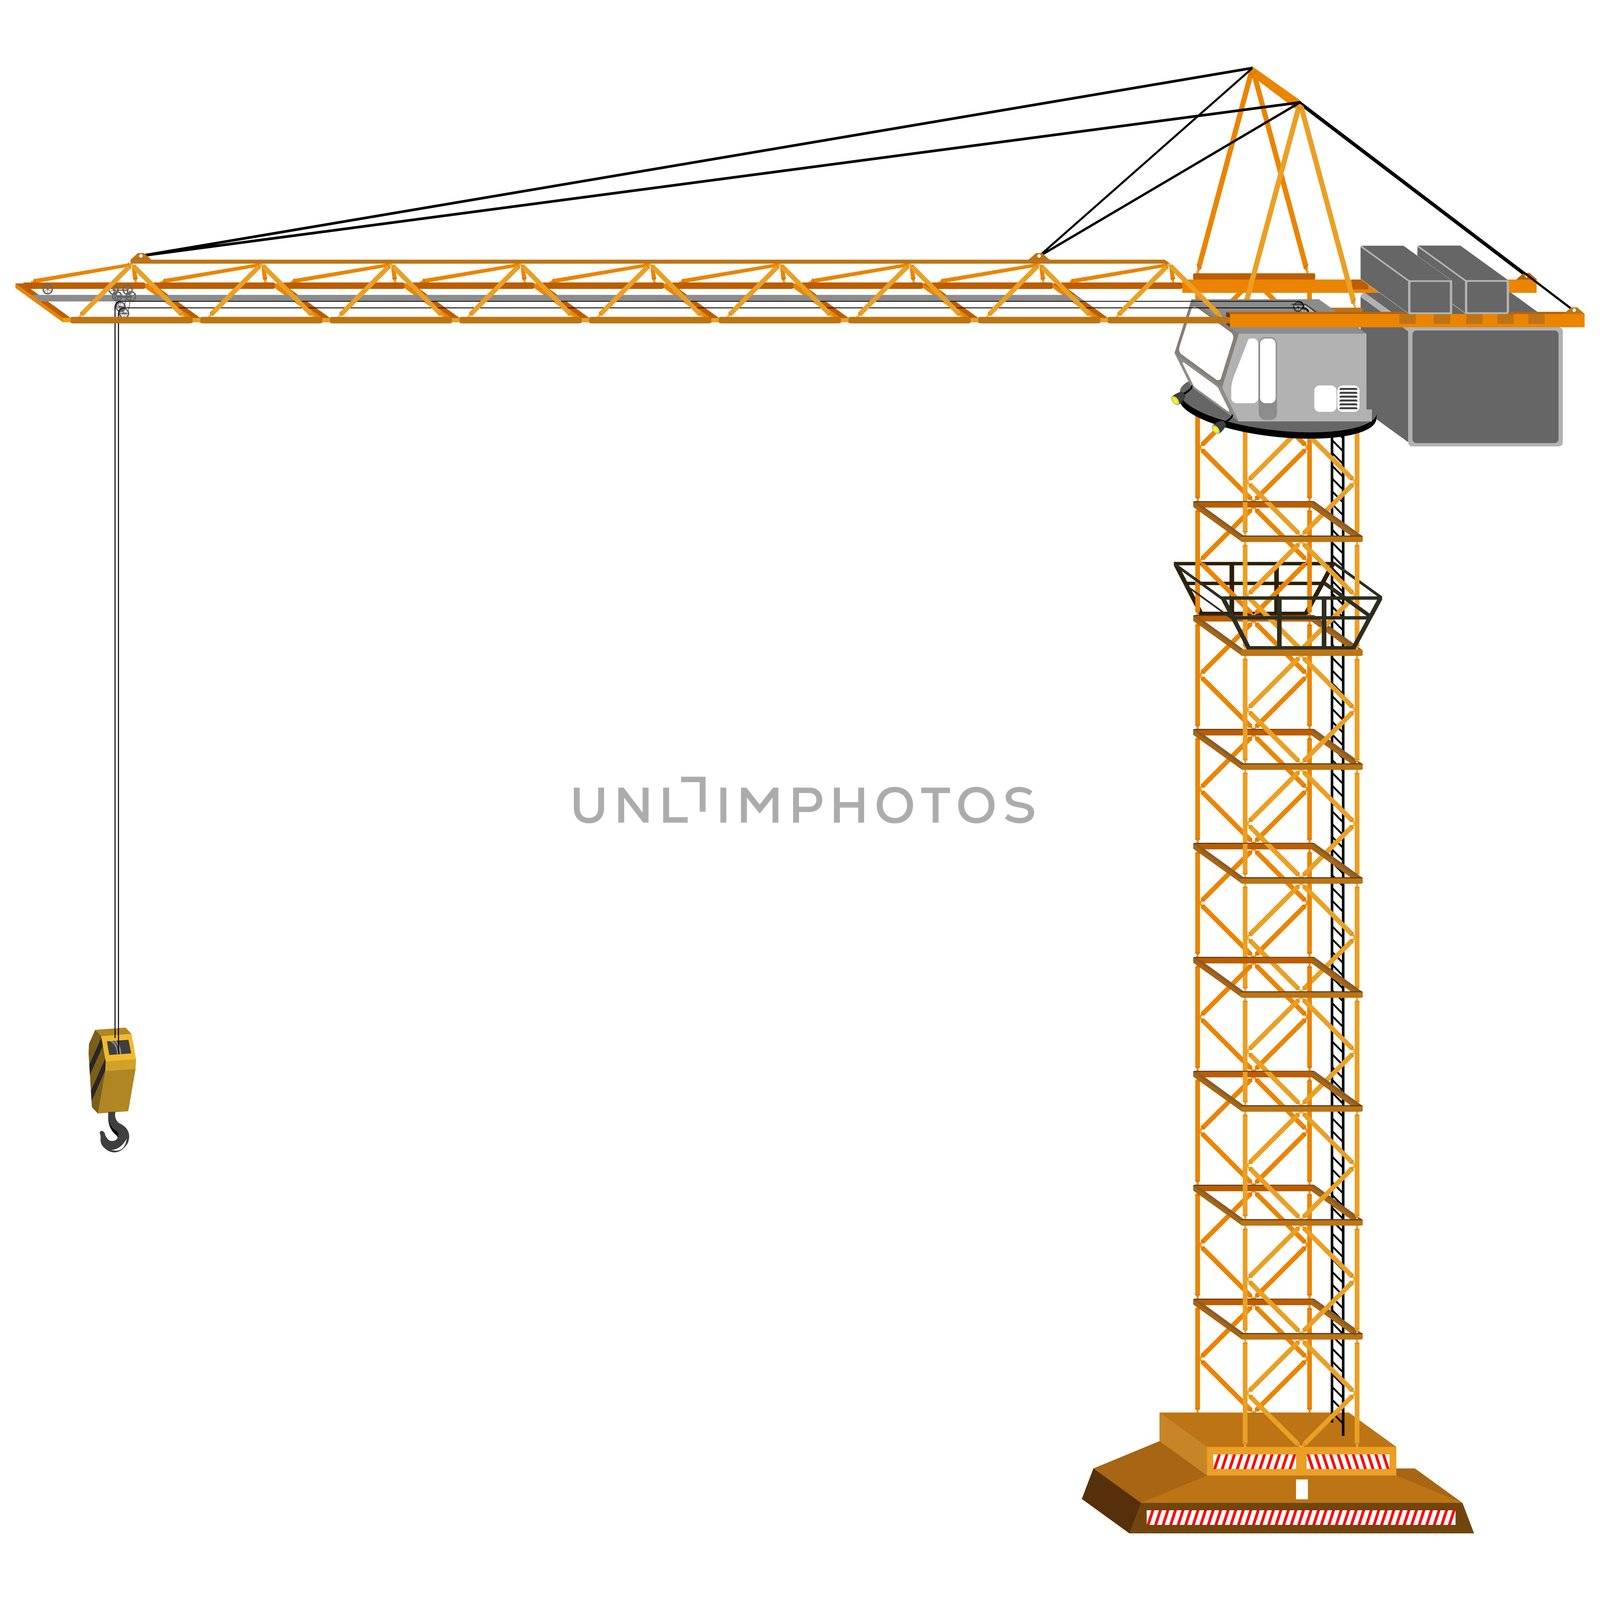 tridimensional crane drawing, isolated on white background; abstract art illustration